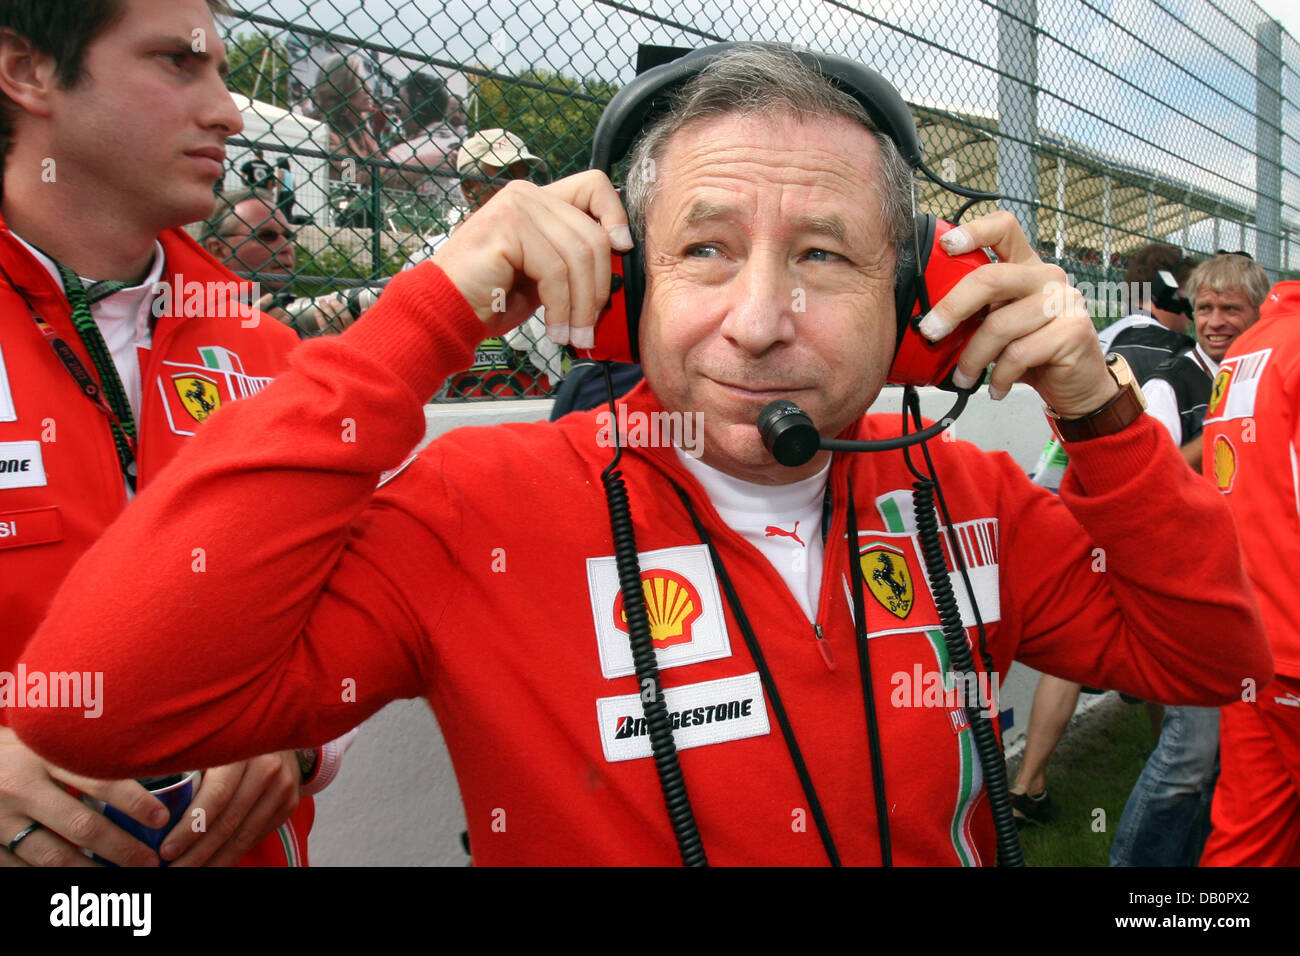 French Jean Todt, CEO of Scuderia Ferrari, gestures prior to the start of the Grand Prix of Belgium at the race track in Spa-Francorchamps, Belgium, 16 September 2007. Photo: JENS BUETTNER Stock Photo